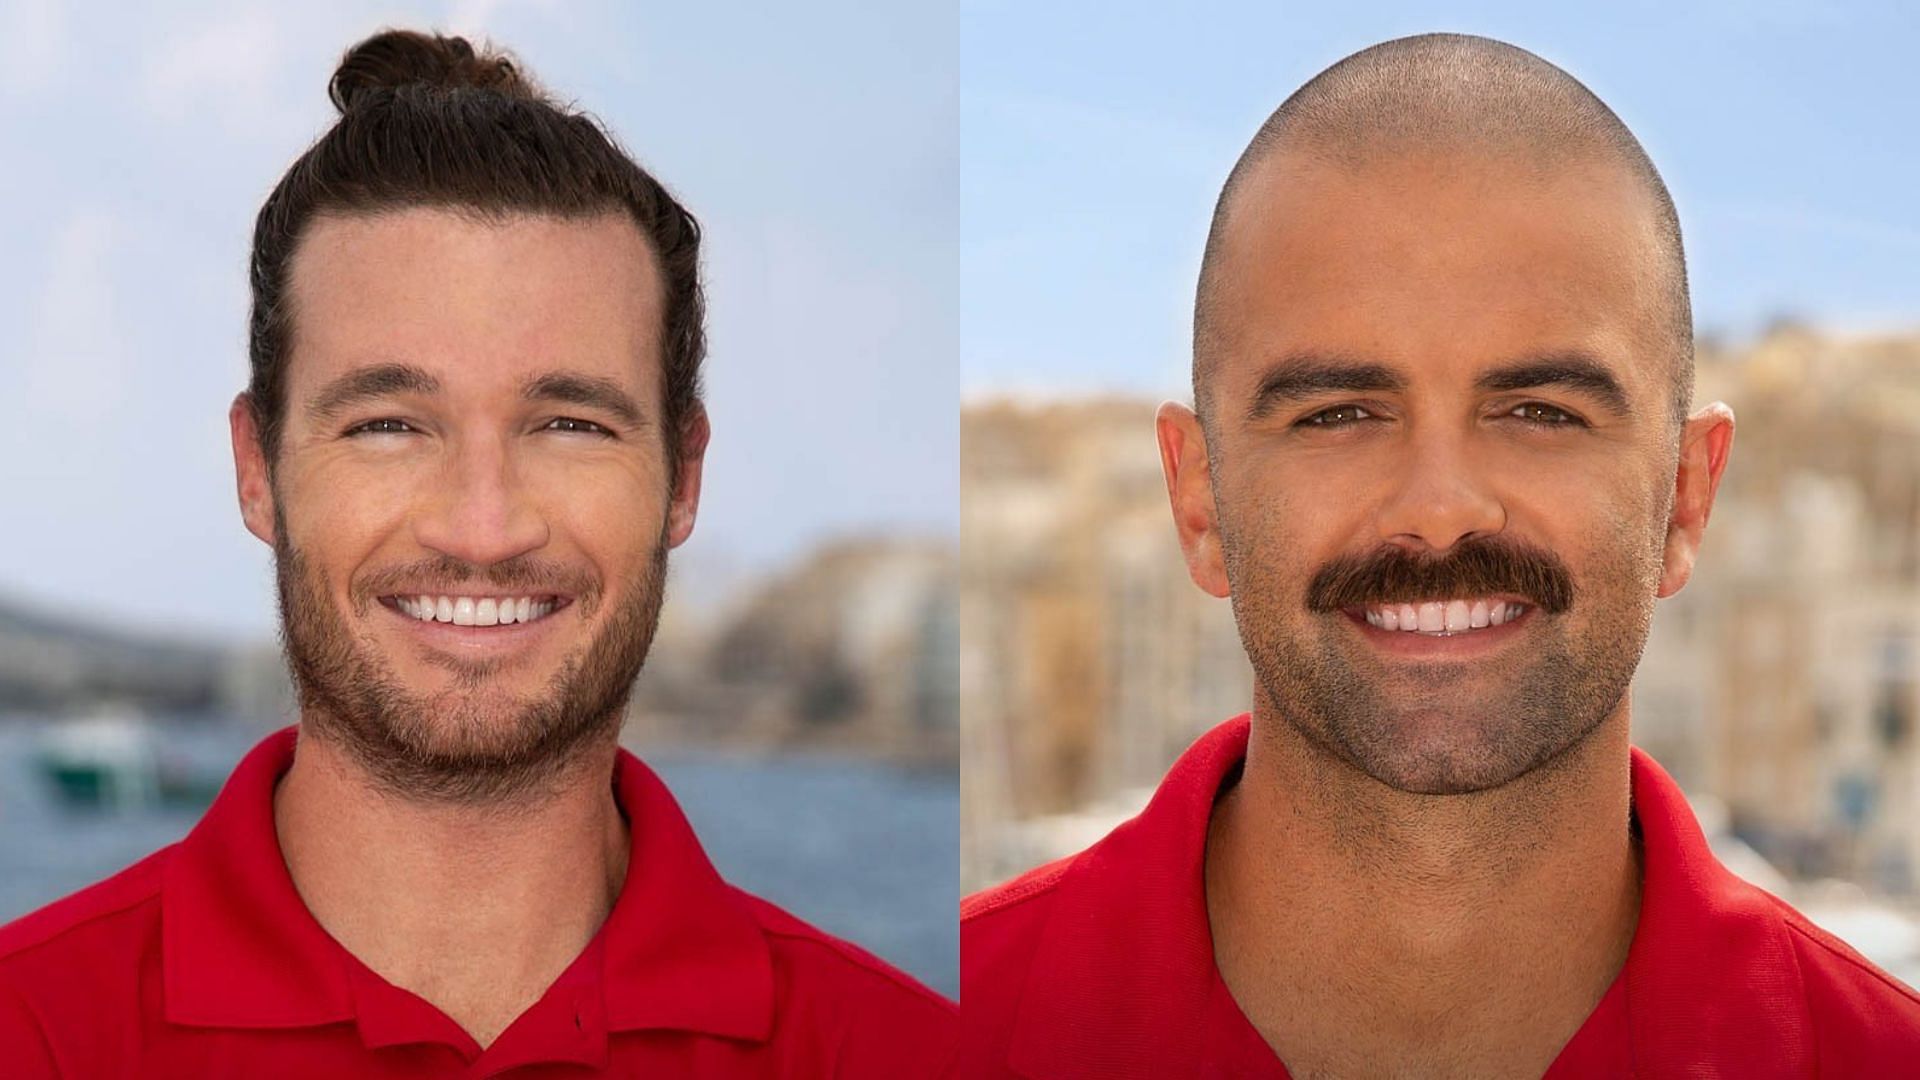 Jason Gaskell and Storm Smith from Below Deck Mediterranean